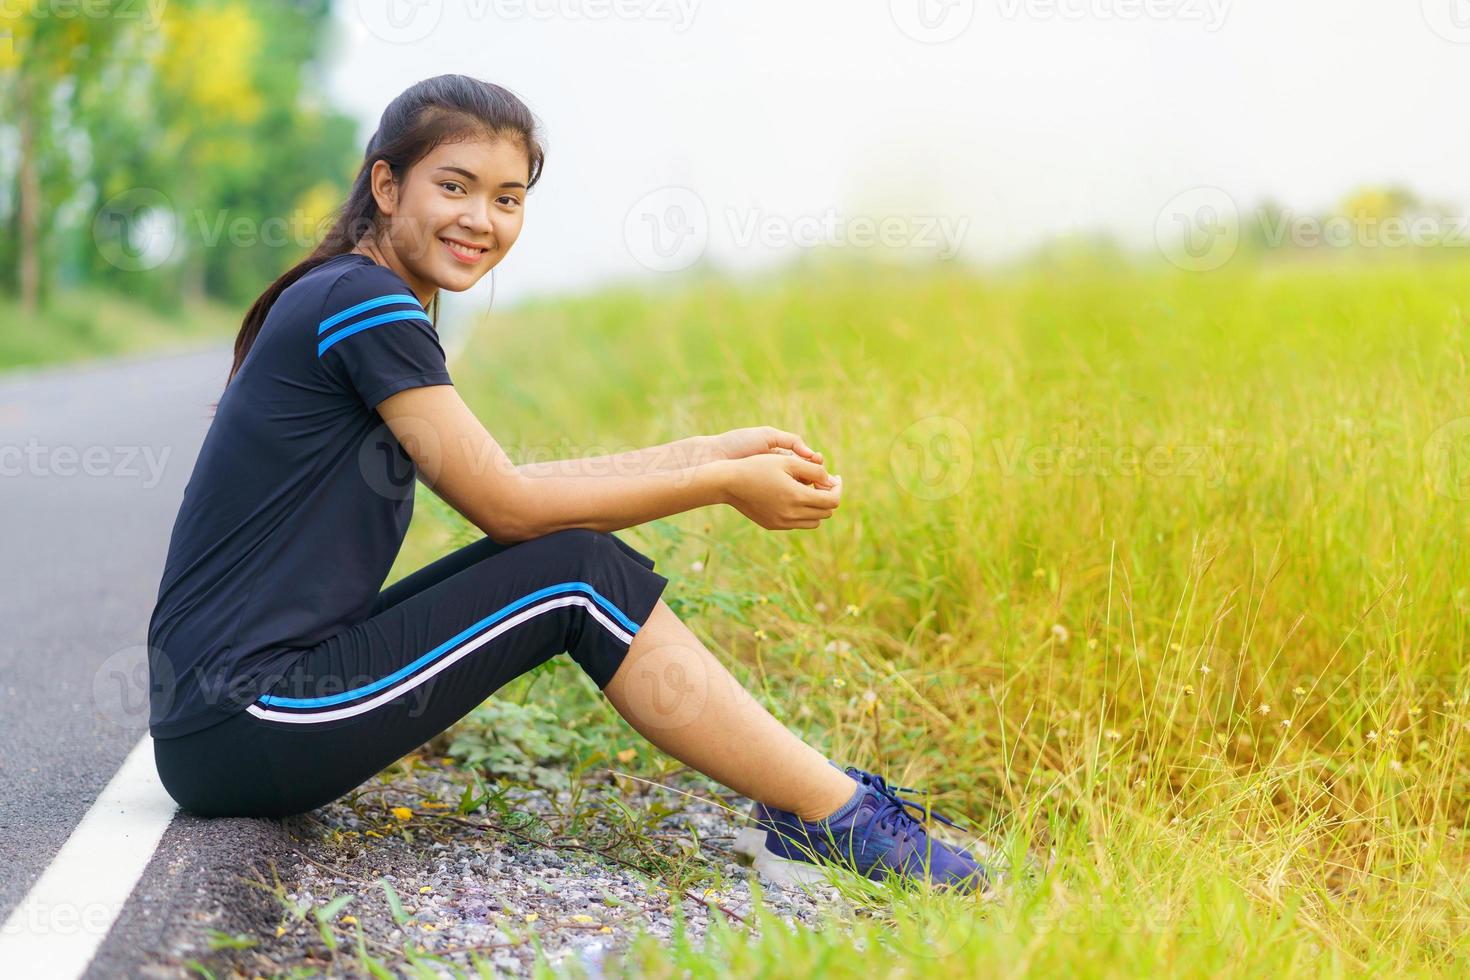 Portrait of beautiful girl in sportswear smiling during exercise photo